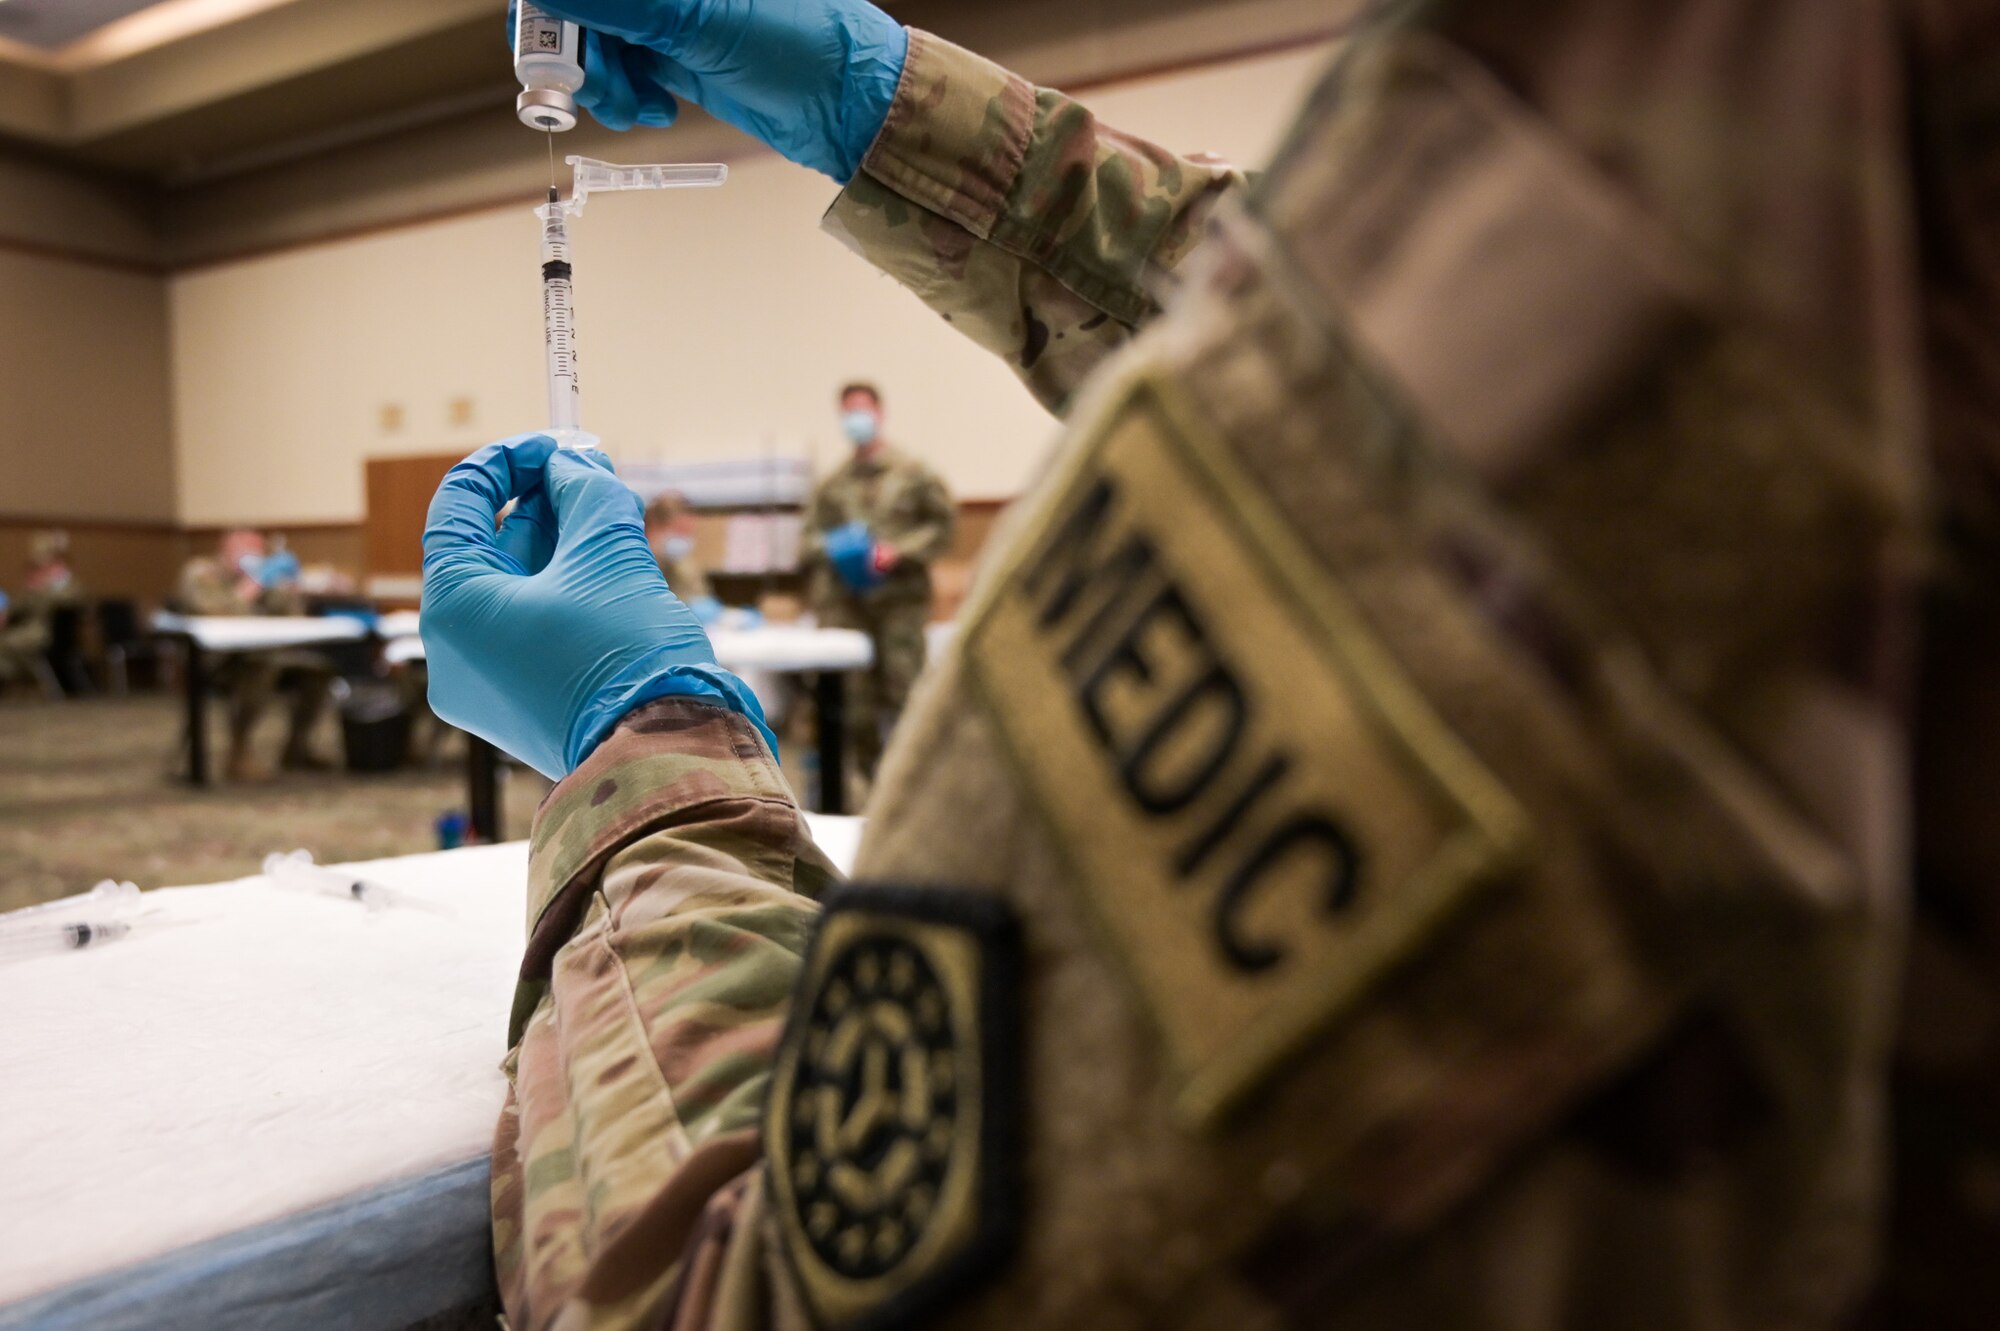 U.S. Army combat medic draws the COVID-19 vaccine into a syringe in the Tinley Park Convention Center in Tinley Park, Illinois, February 26, 2021. Medical professionals draw the vaccine as a part of the daily process to match the numbers of vaccines prepared with the number of patients receiving it. (U.S. National Guard photo by Staff Sgt. Aaron Rodriguez)